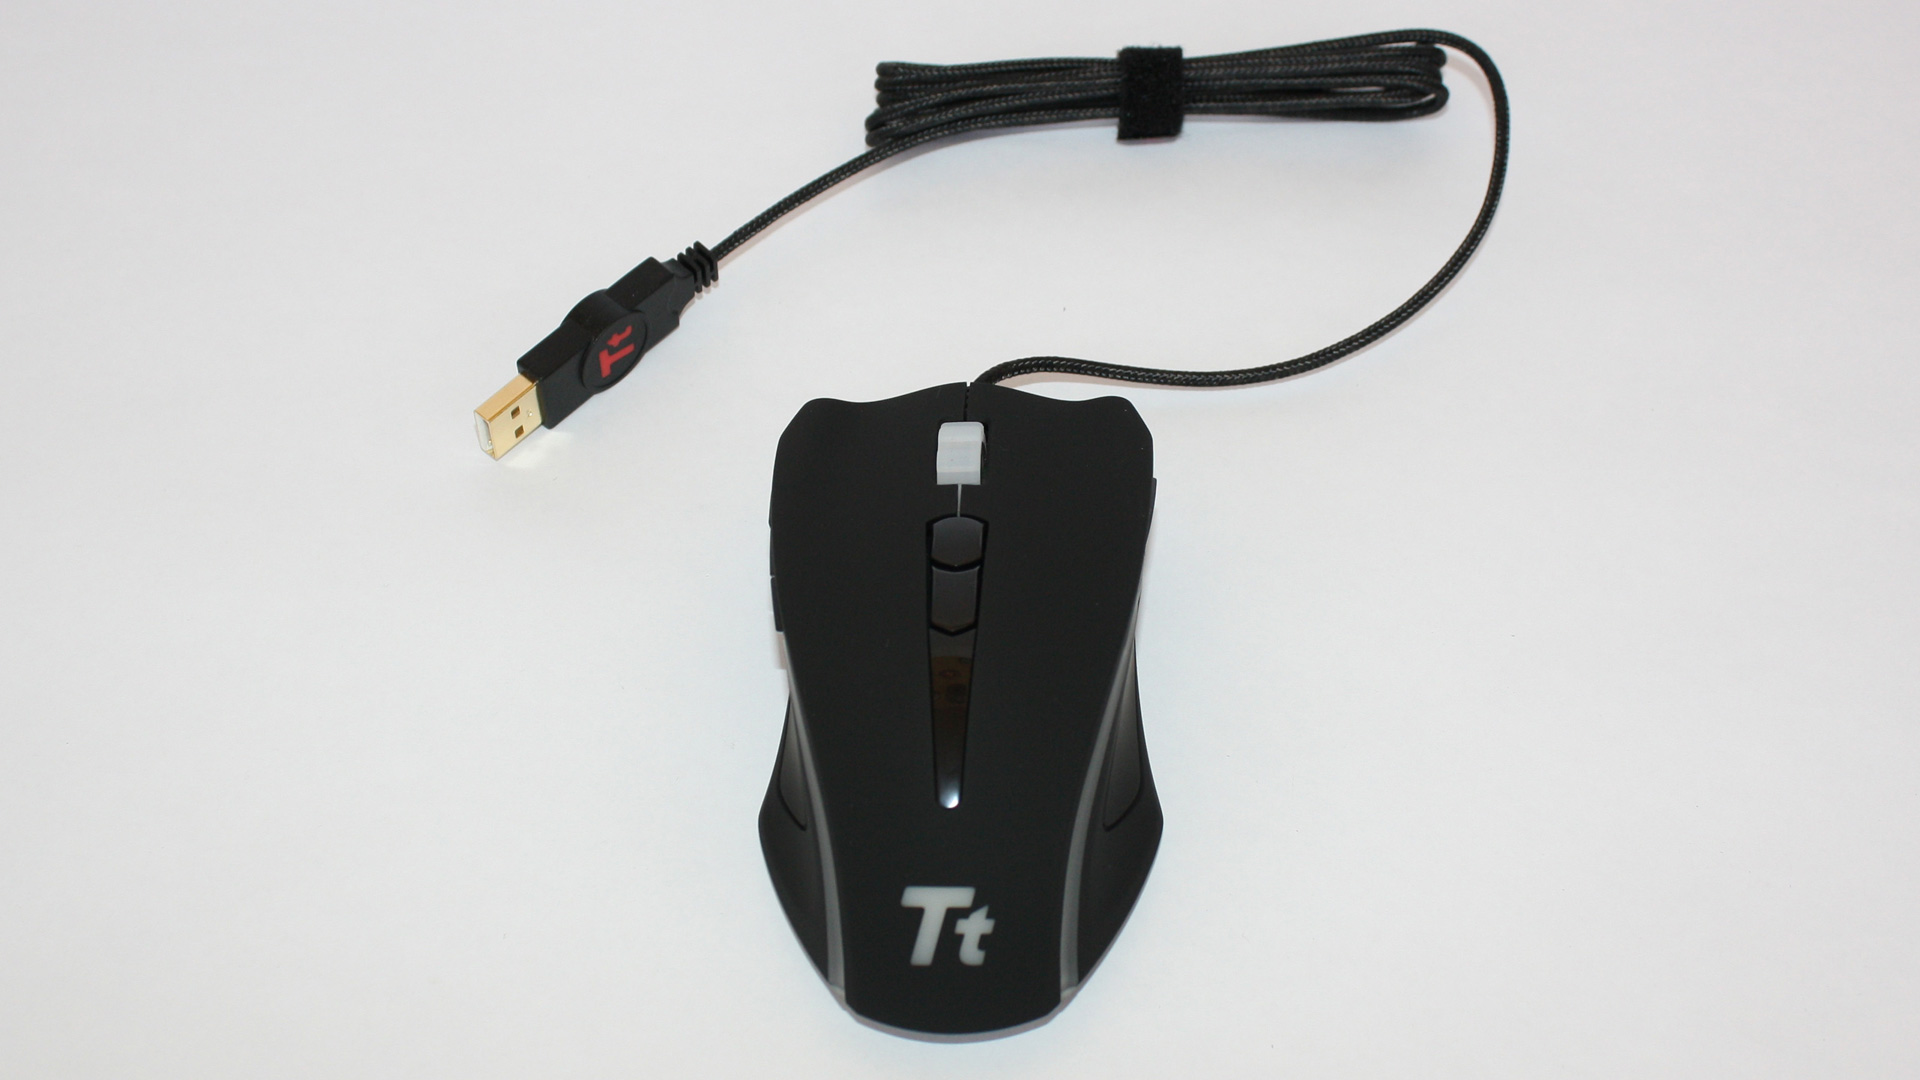 Media asset (photo, screenshot, or image in full size) related to contents posted at 3dfxzone.it | Image Name: Thermaltake_black_element_gaming_mouse_up.jpg